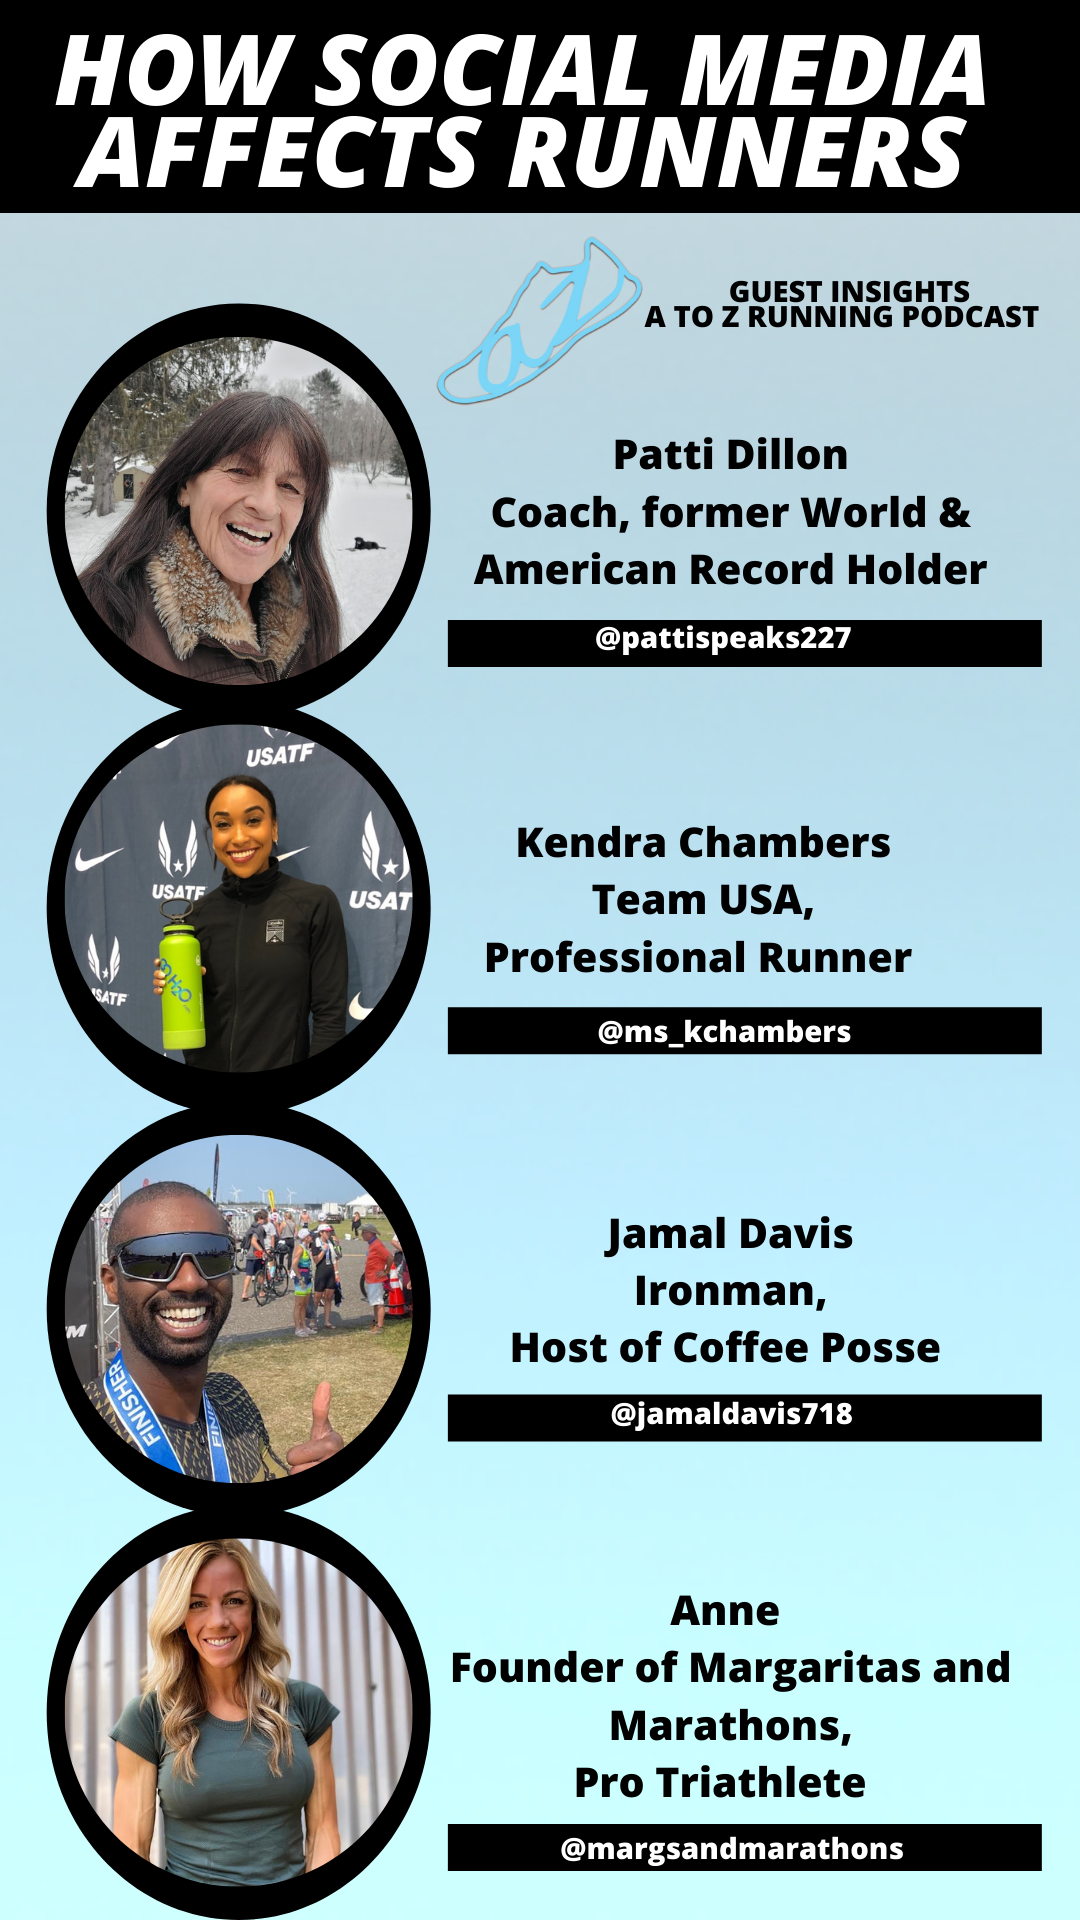 Smiling faces of featured guests on the A to Z Running Podcast. Photos of Patti Dillon, Kendra Chambers, Jamal Davis, and Anne of MargsandMarathons